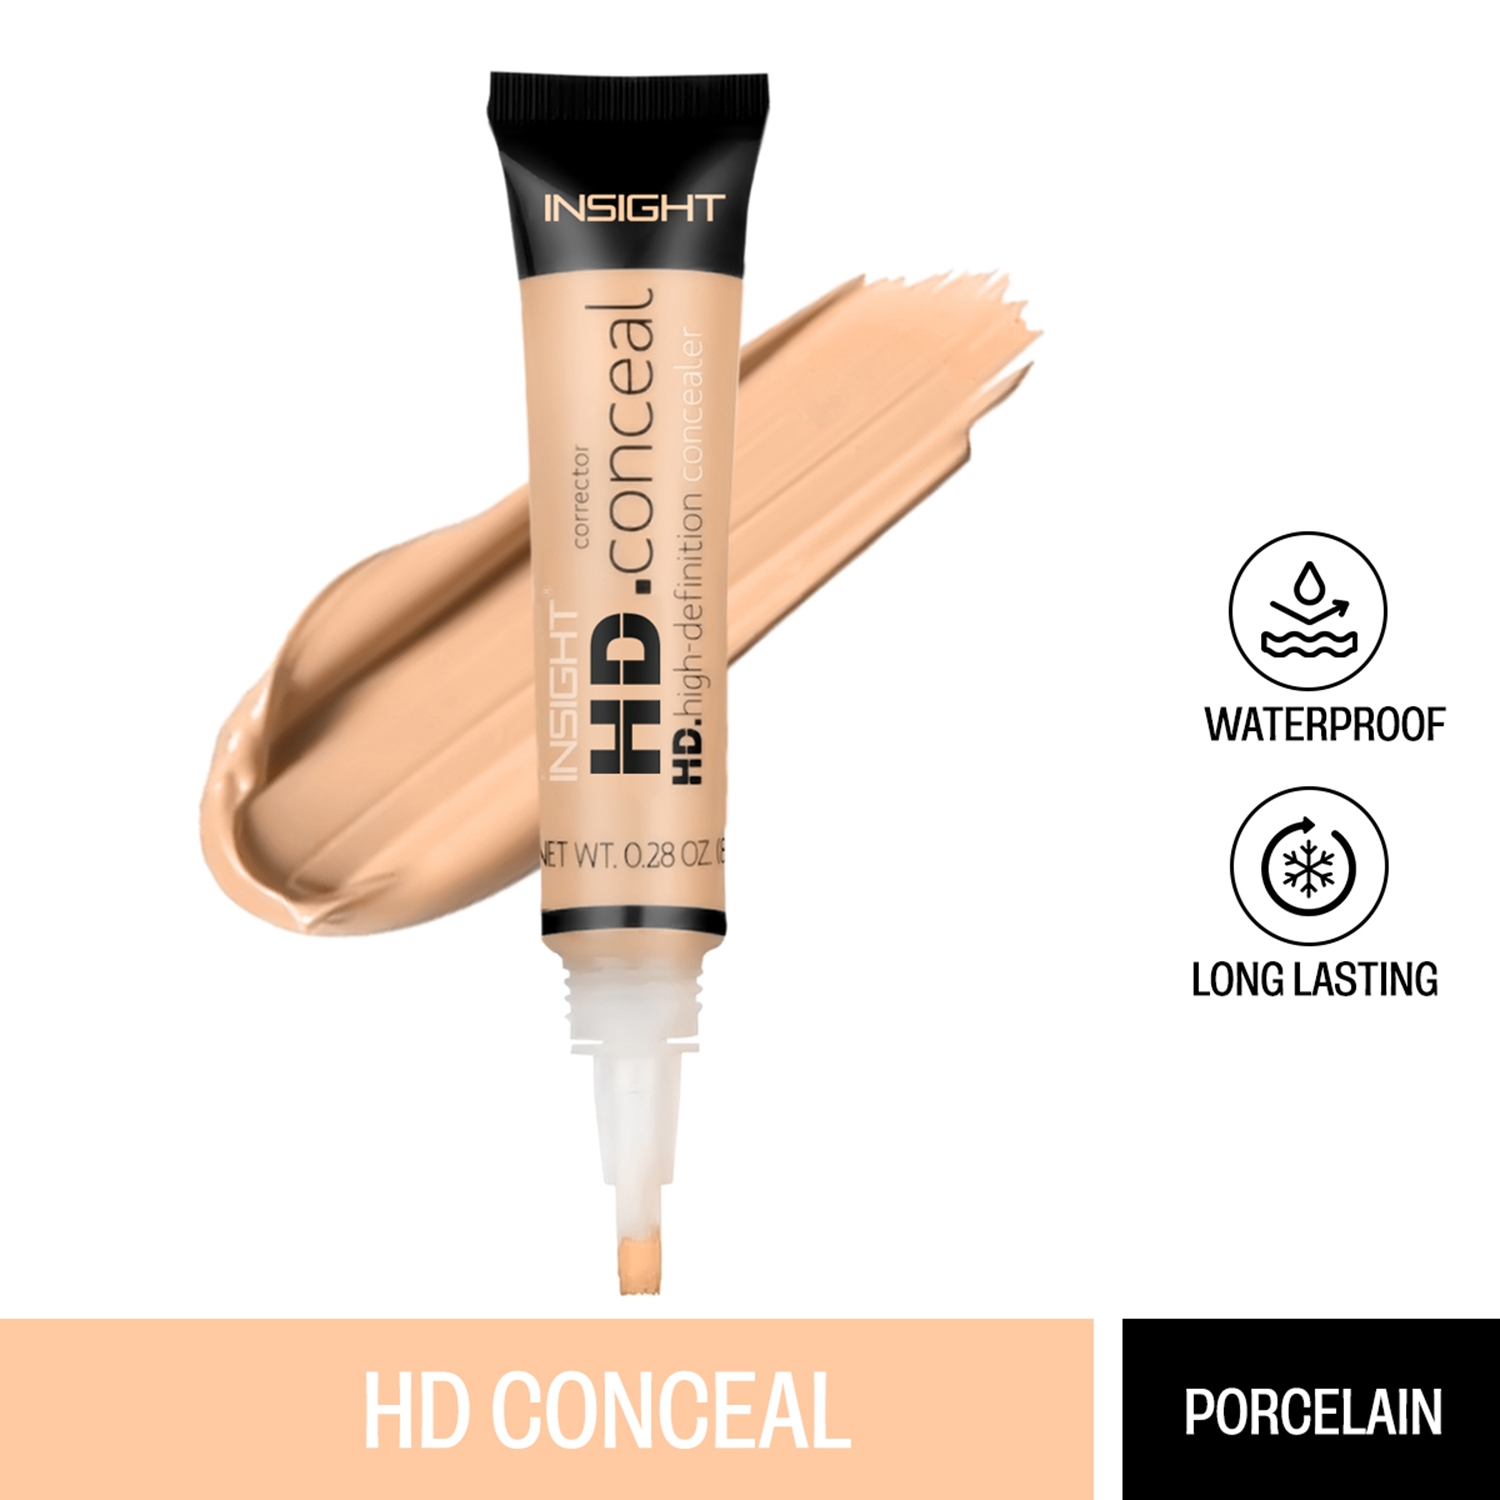 Insight Cosmetics HD Conceal - Porcelain (8g)